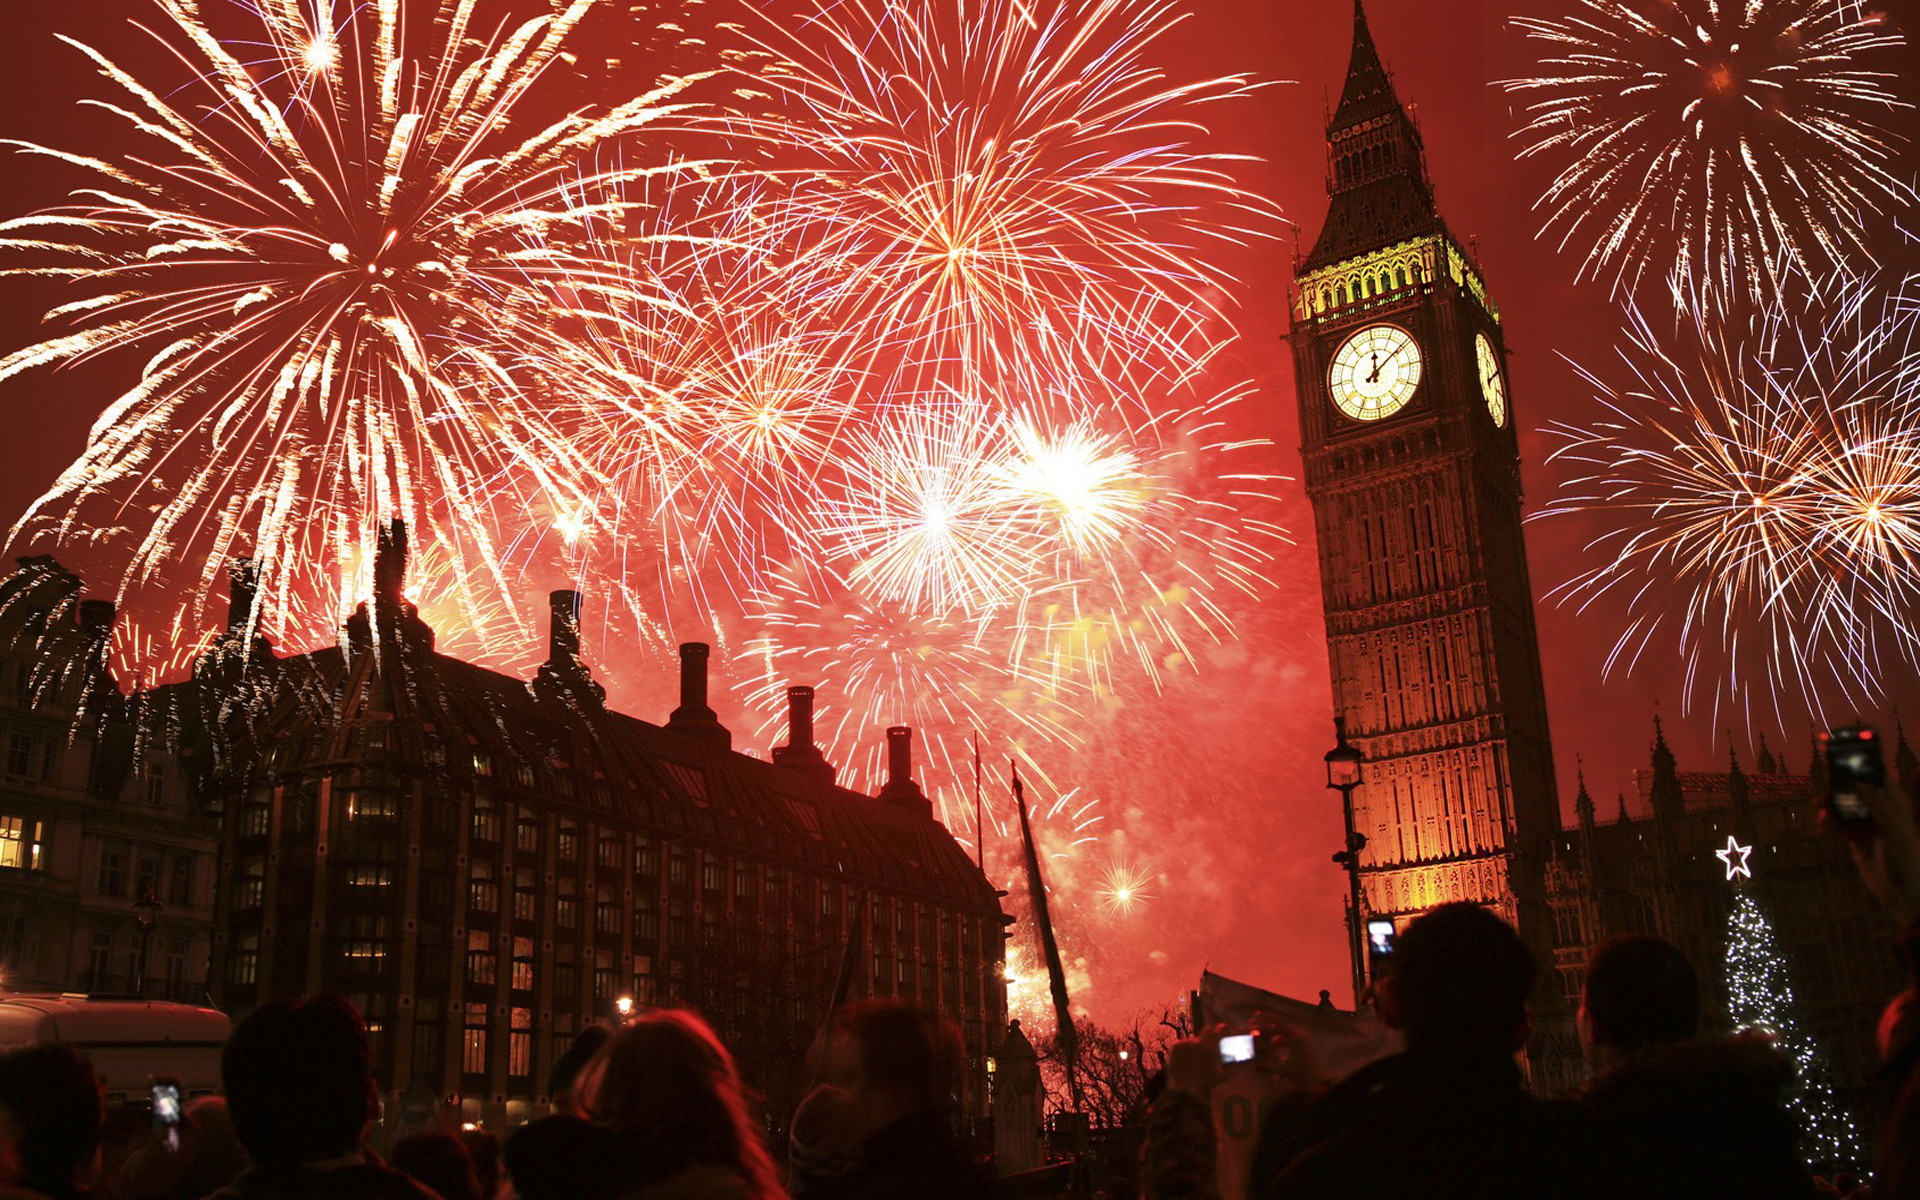 New Year's Eve Fireworks in London HD Wallpaper | Background Image ...
 New Years Fireworks Wallpaper 2015